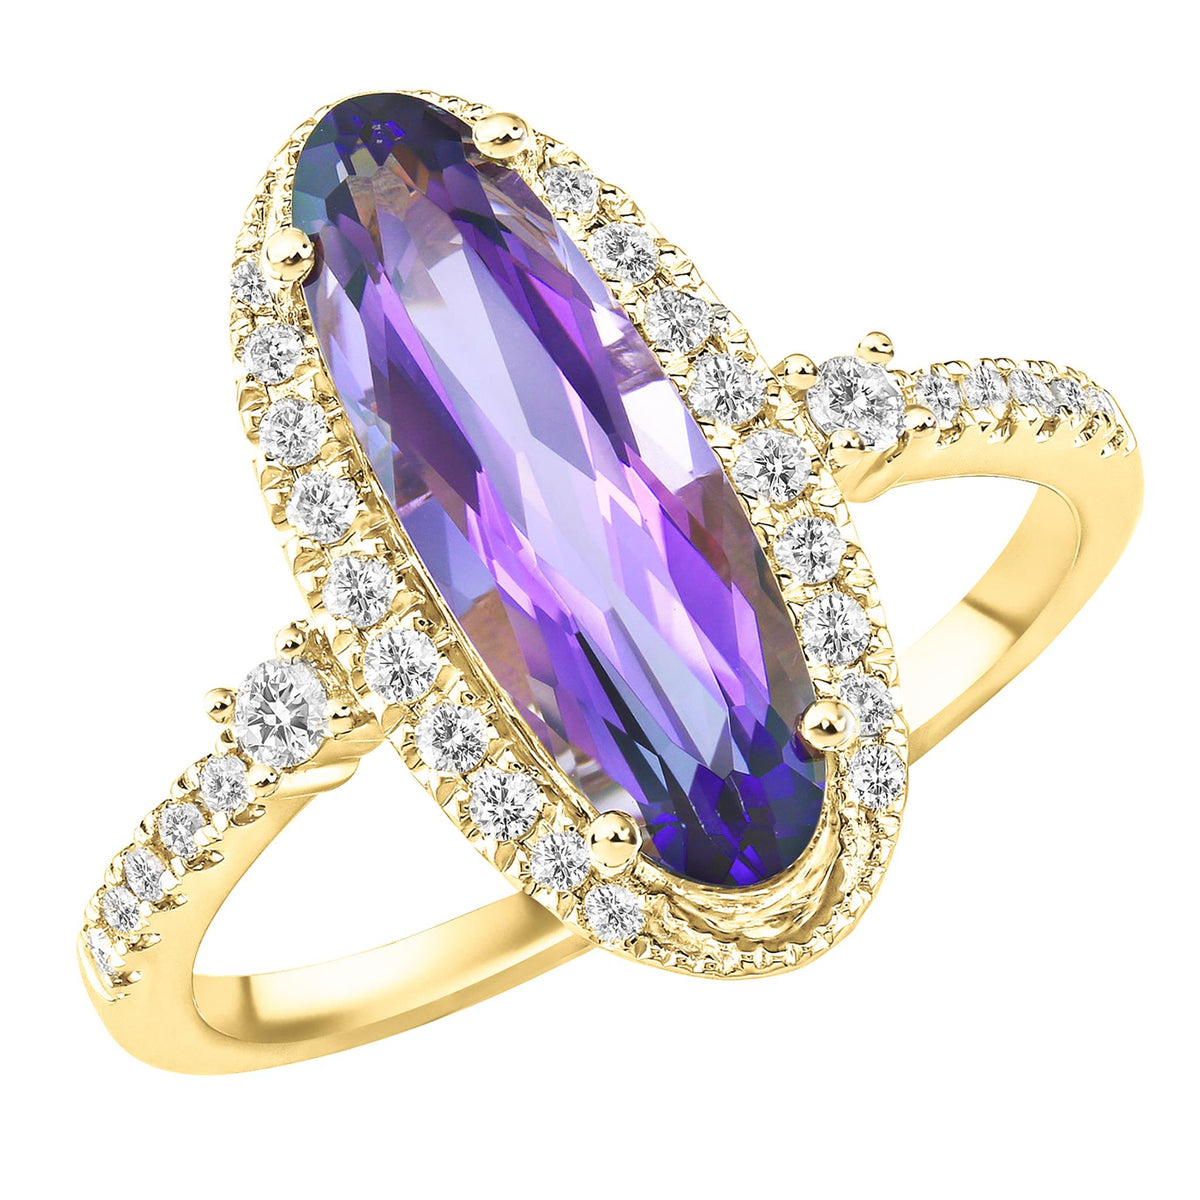 14Kt Yellow Gold Halo Ring With 2.07ct Elongated Oval  Amethyst